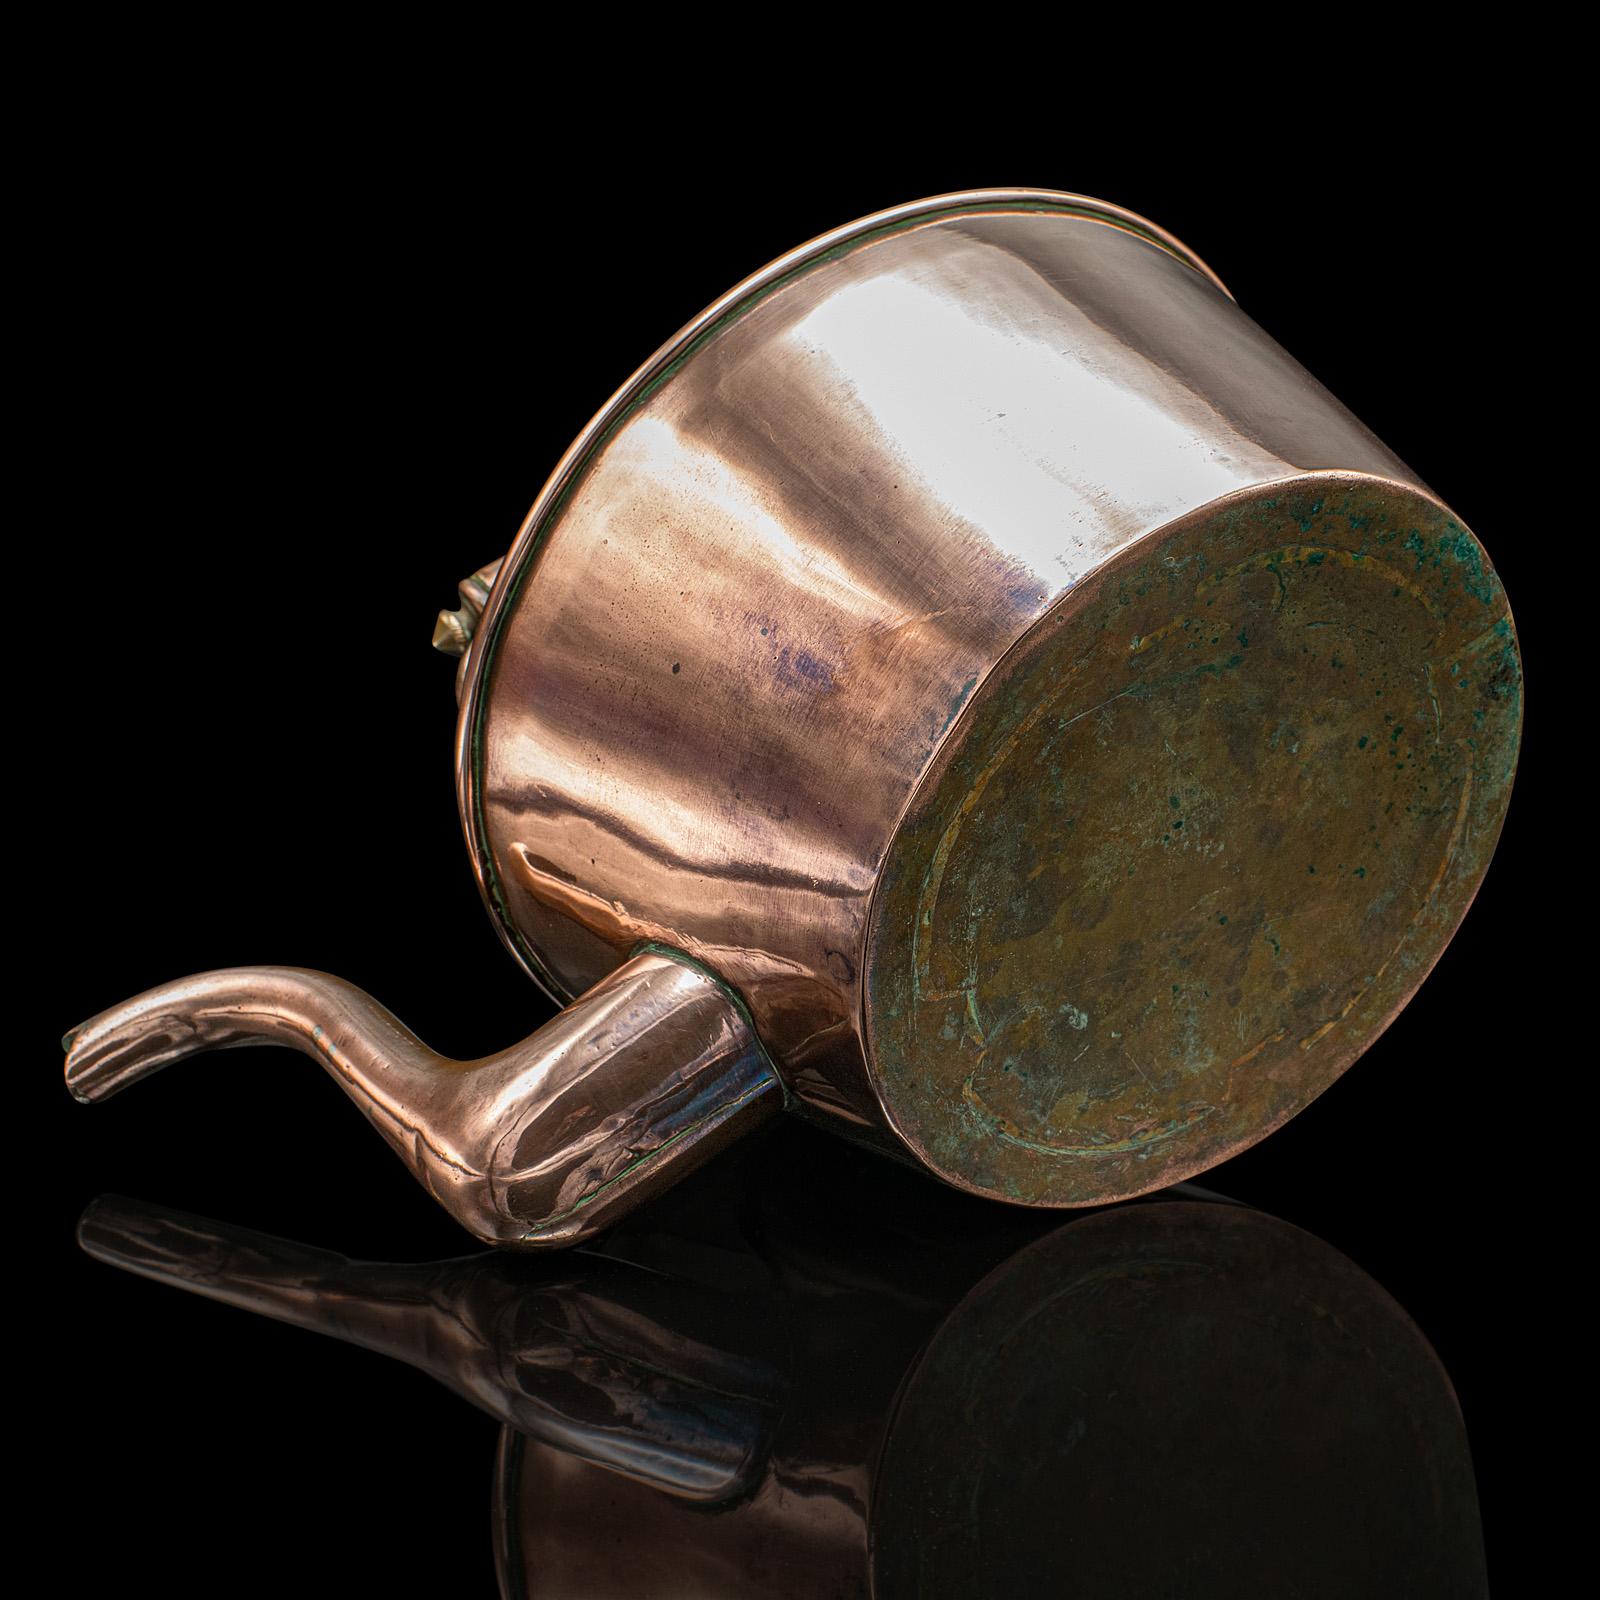 Antique Scullery Kettle, English, Copper, Stovetop Teapot, Victorian, Circa 1870 For Sale 5